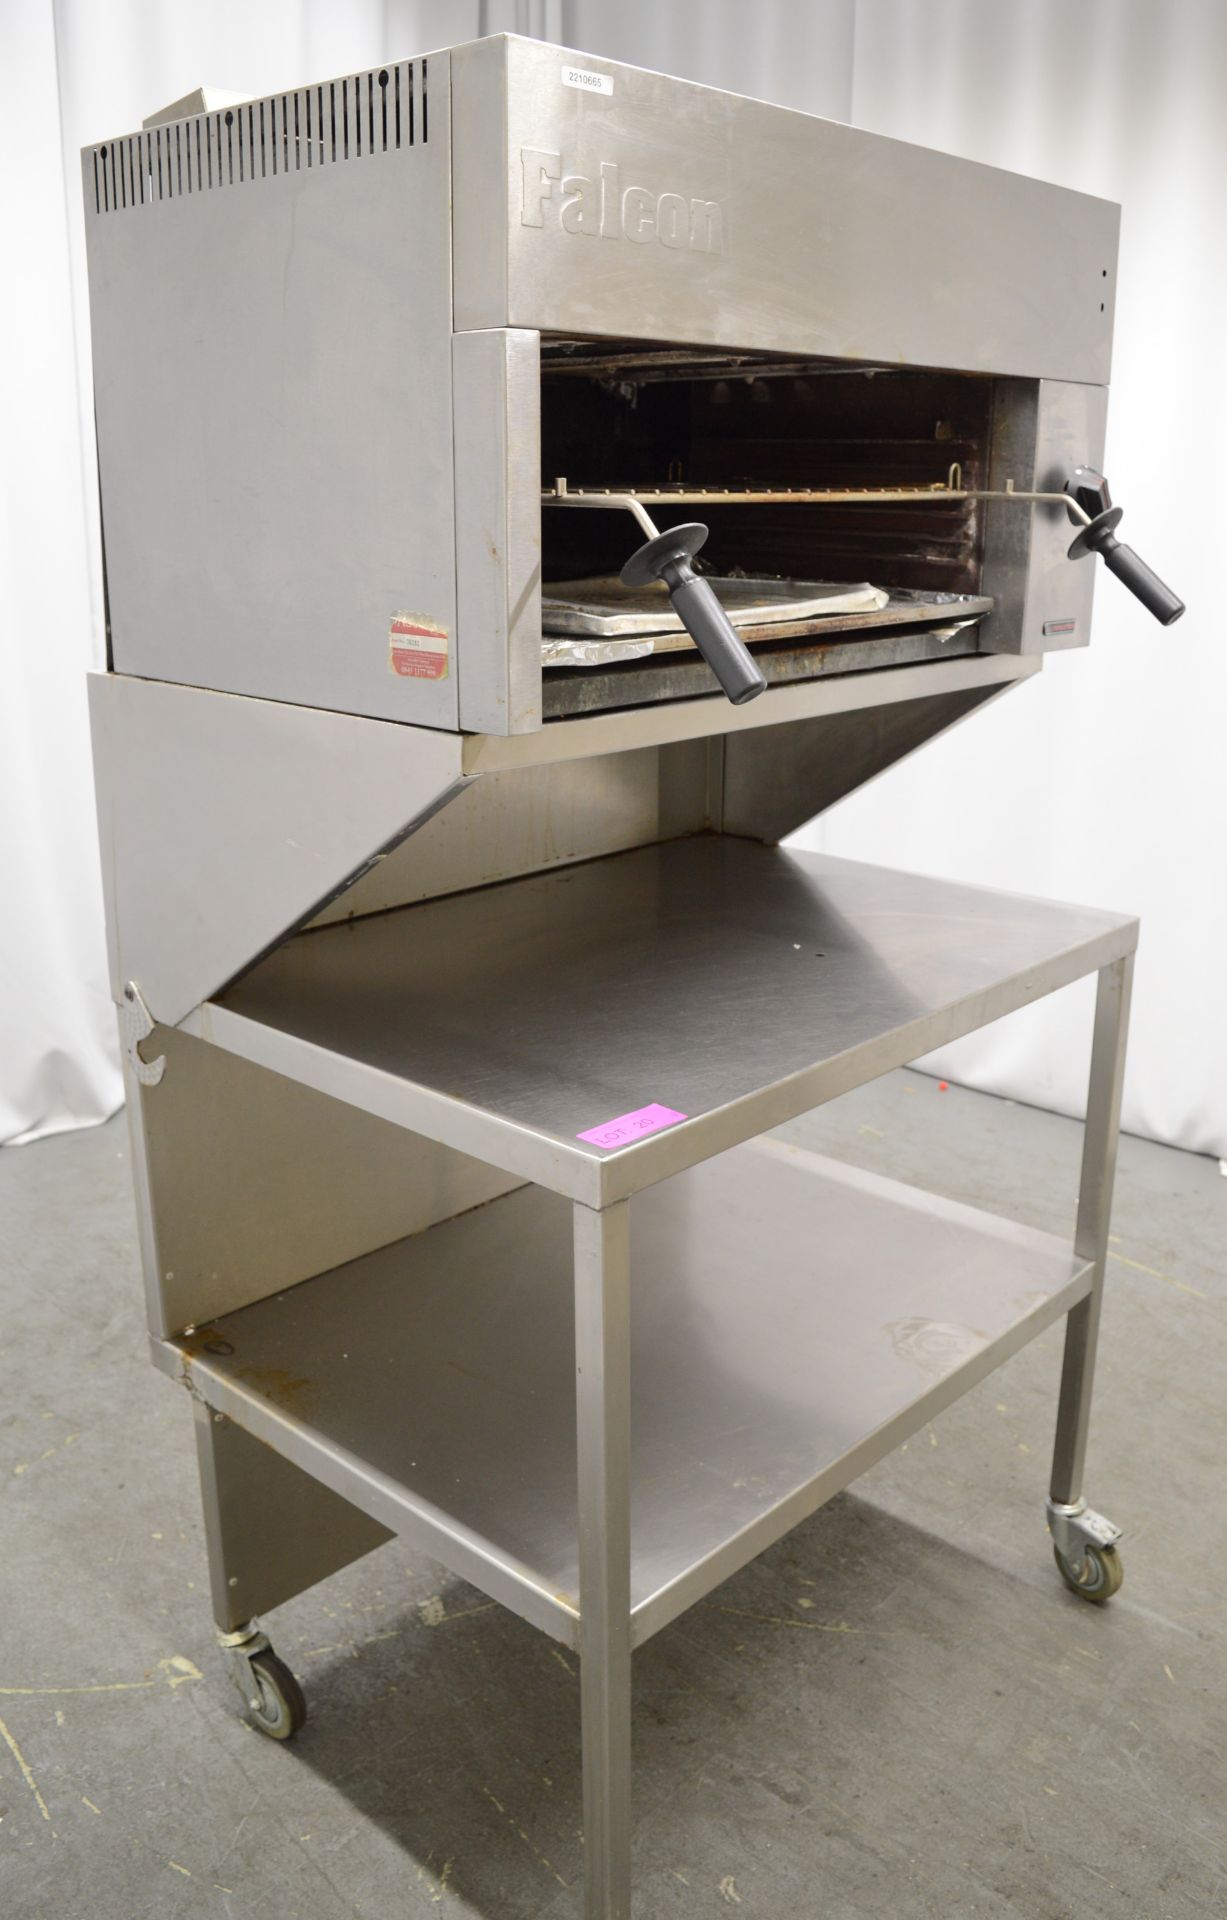 Falcon Dominator G2522 steakhouse grill with prep table, natural gas - Image 2 of 7